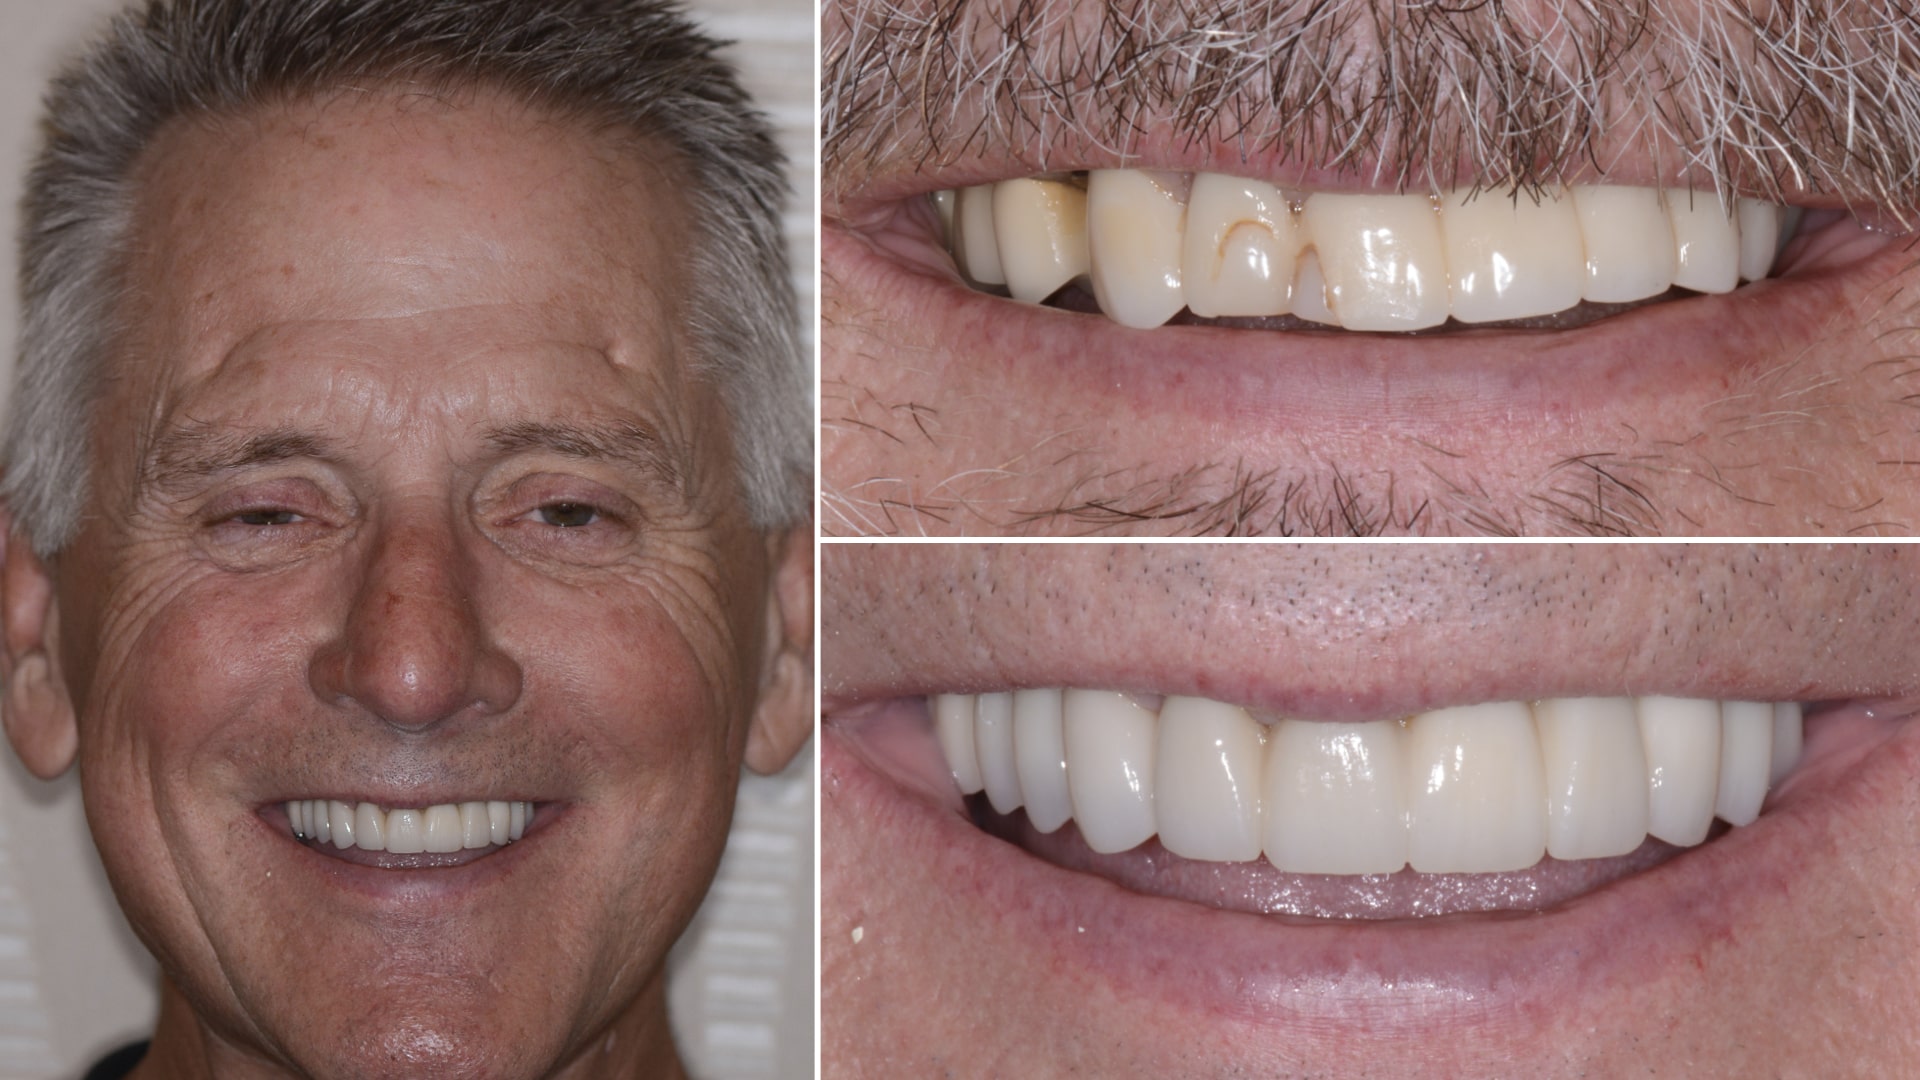 Man's smile before and after dental treatment